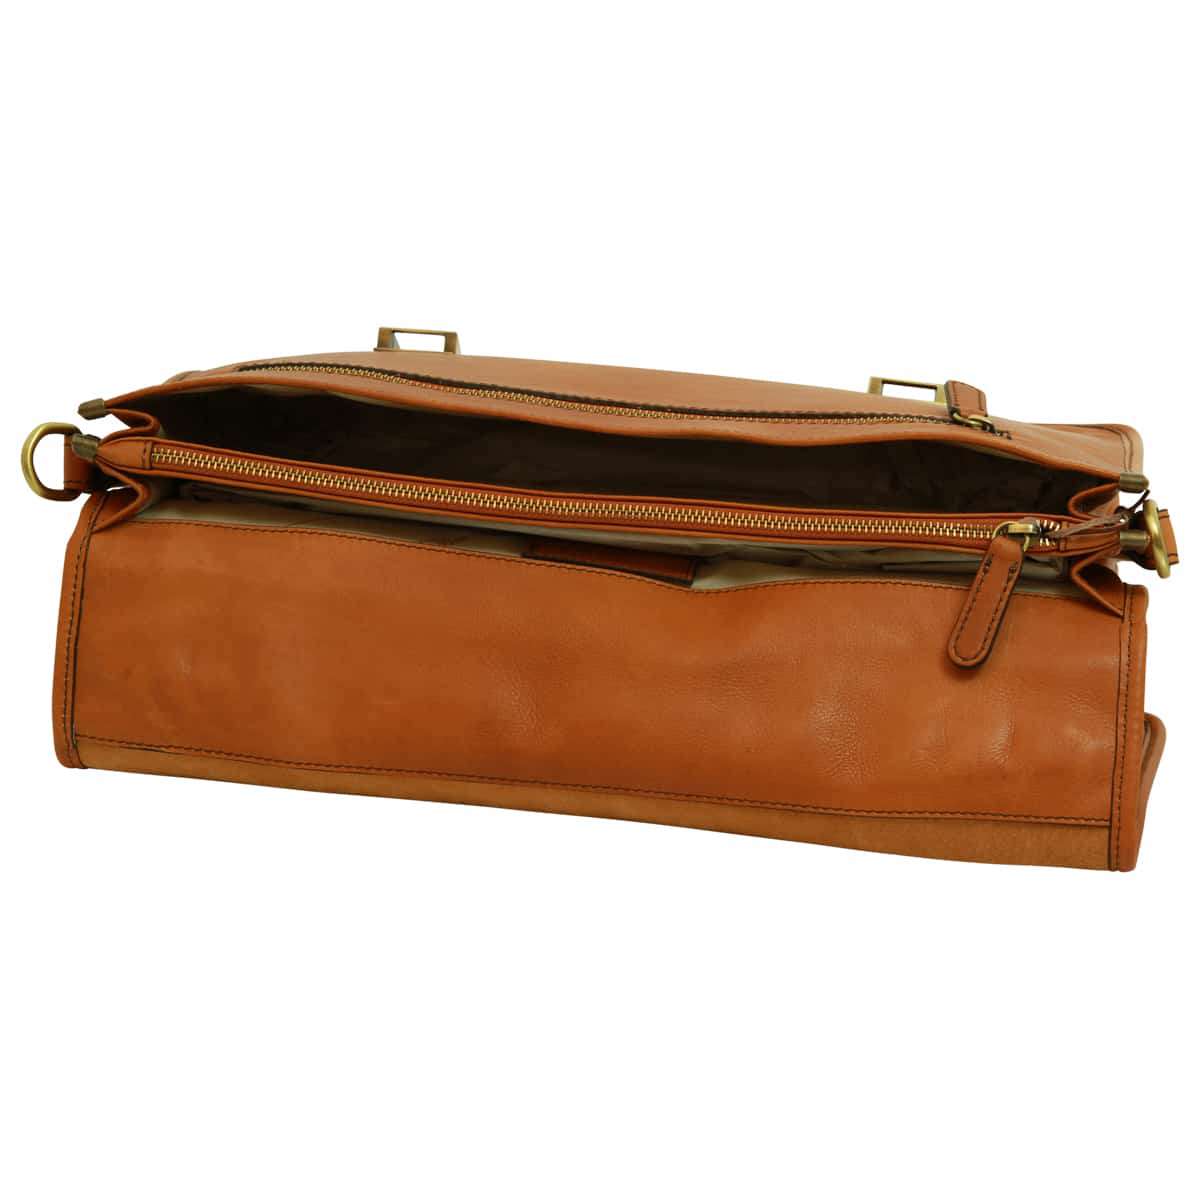 Soft Calfskin Leather Briefcase with shoulder strap - Gold | 030991CO | EURO | Old Angler Firenze